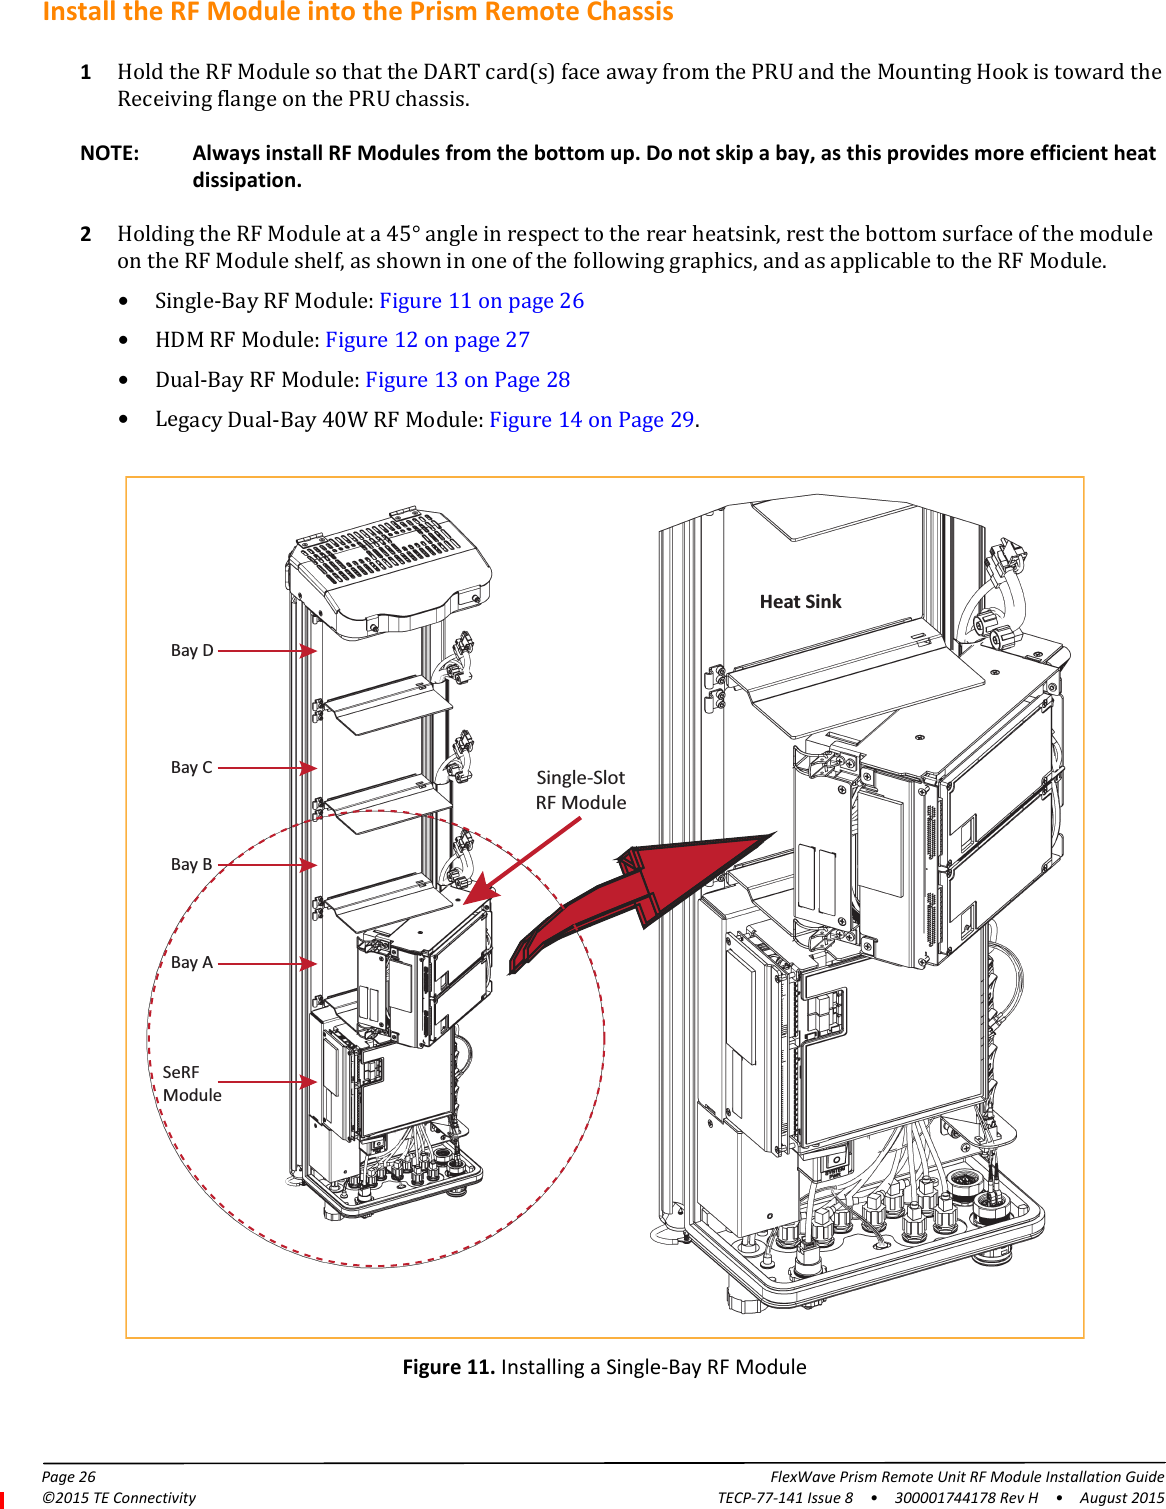 Page 26 FlexWave Prism Remote Unit RF Module Installation Guide©2015 TE Connectivity TECP-77-141 Issue 8  •  300001744178 Rev H  •  August 2015Install the RF Module into the Prism Remote Chassis1Hold the RF Module so that the DART card(s) face away from the PRU and the Mounting Hook is toward the Receiving flange on the PRU chassis.NOTE: Always install RF Modules from the bottom up. Do not skip a bay, as this provides more efficient heat dissipation.2Holding the RF Module at a 45° angle in respect to the rear heatsink, rest the bottom surface of the module on the RF Module shelf, as shown in one of the following graphics, and as applicable to the RF Module.•Single-Bay RF Module: Figure 11 on page 26•HDM RF Module: Figure 12 on page 27•Dual-Bay RF Module: Figure 13 on Page 28•Legacy Dual-Bay 40W RF Module: Figure 14 on Page 29.Bay CBay DSeRFModuleBay ABay BSingle-SlotRF ModuleHeat Sink Figure 11. Installing a Single-Bay RF Module